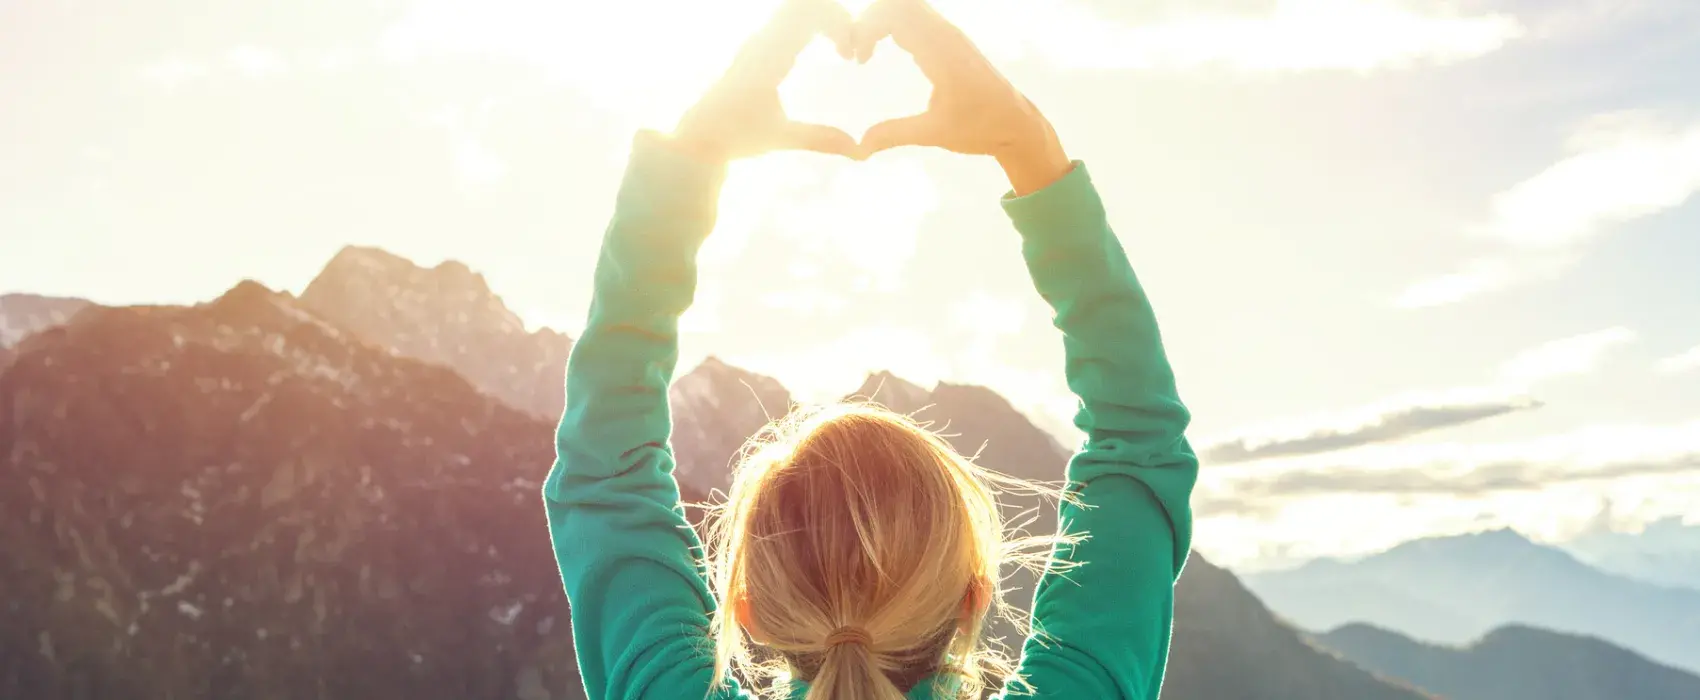 view from a mountain top of a woman making a heart shape with her hands 